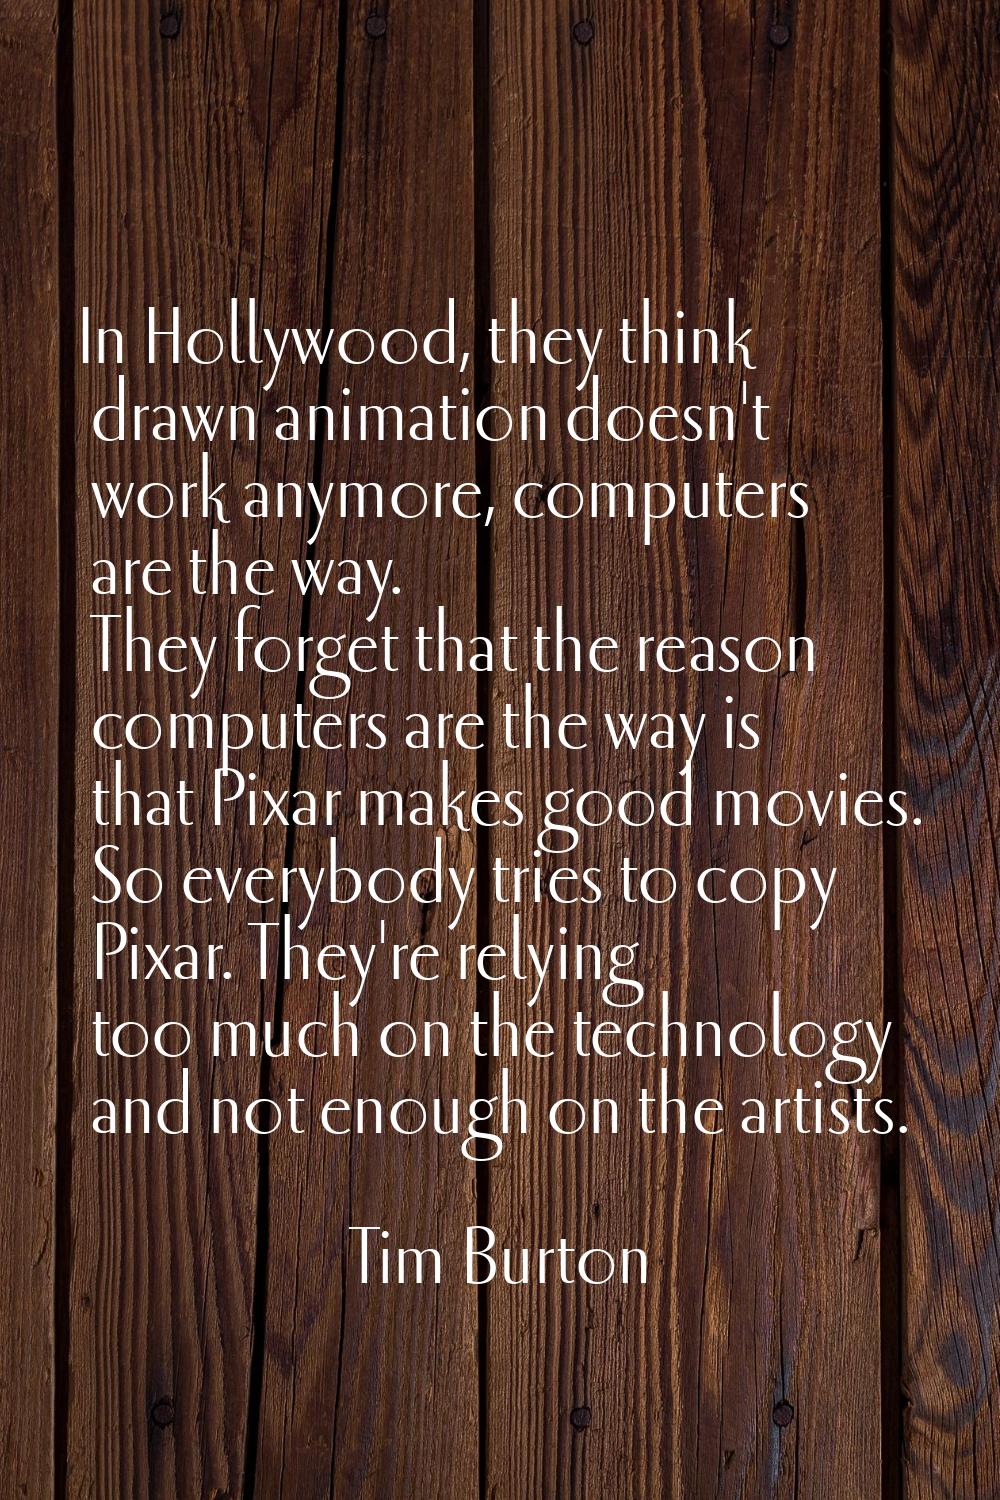 In Hollywood, they think drawn animation doesn't work anymore, computers are the way. They forget t